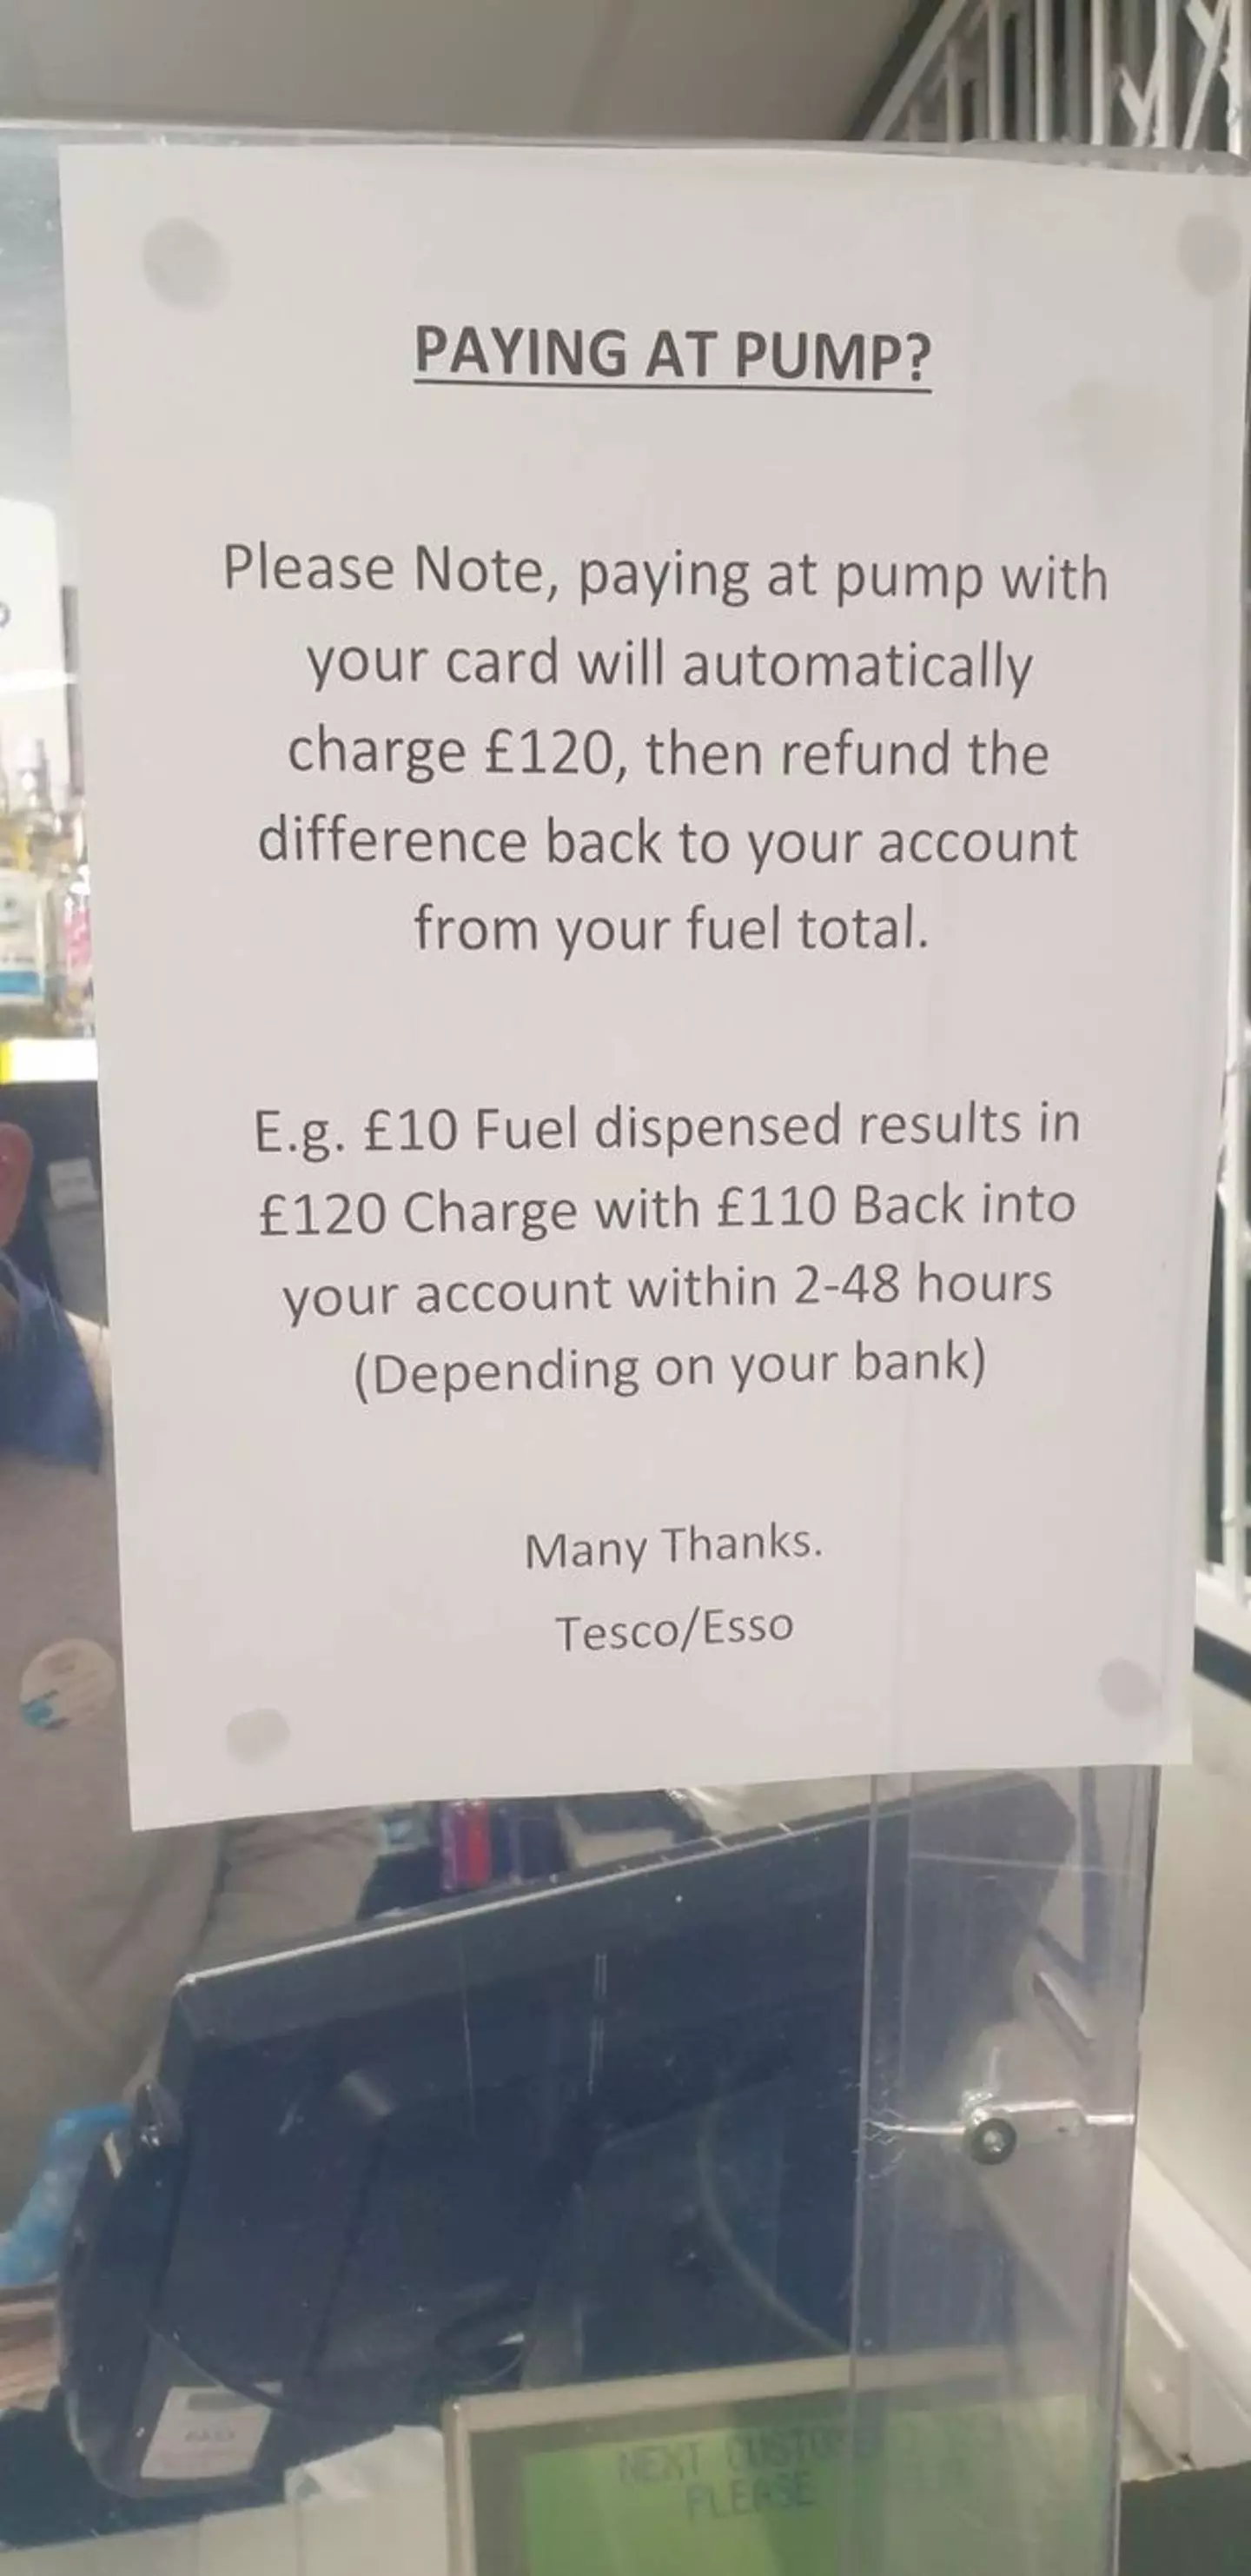 Tesco put a sign up explaining the situation to their customers.